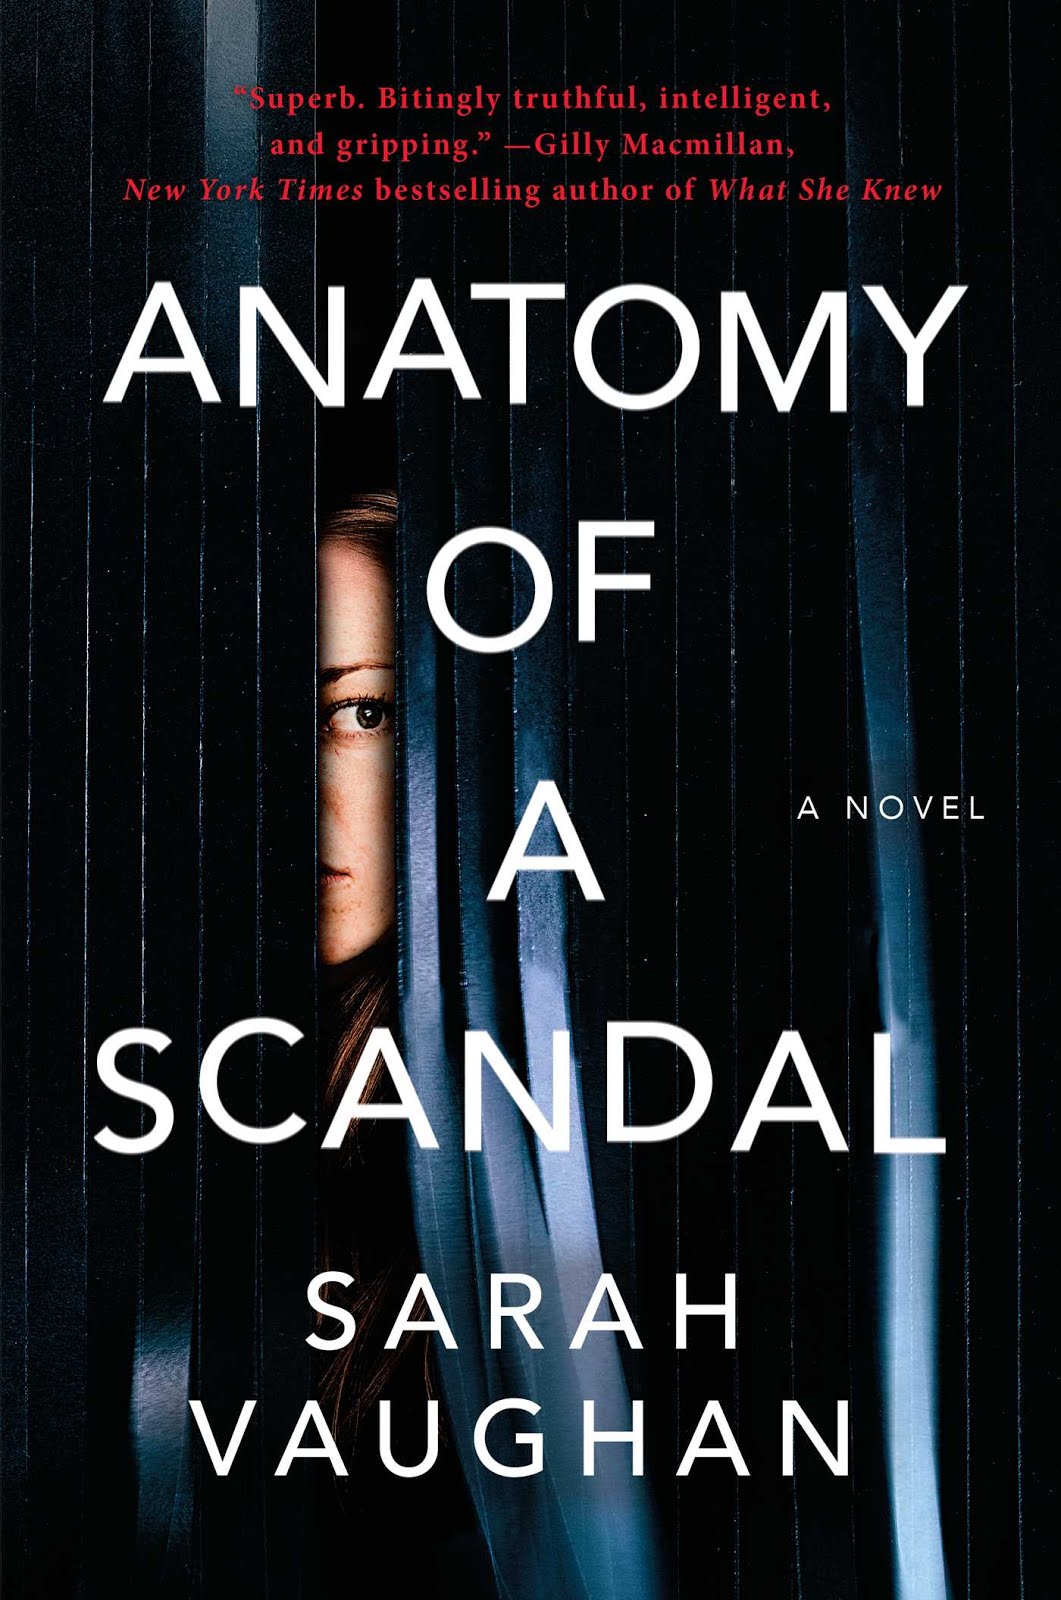 Belle Epoque 1899: Book Review: Anatomy of a Scandal by Sarah Vaughan